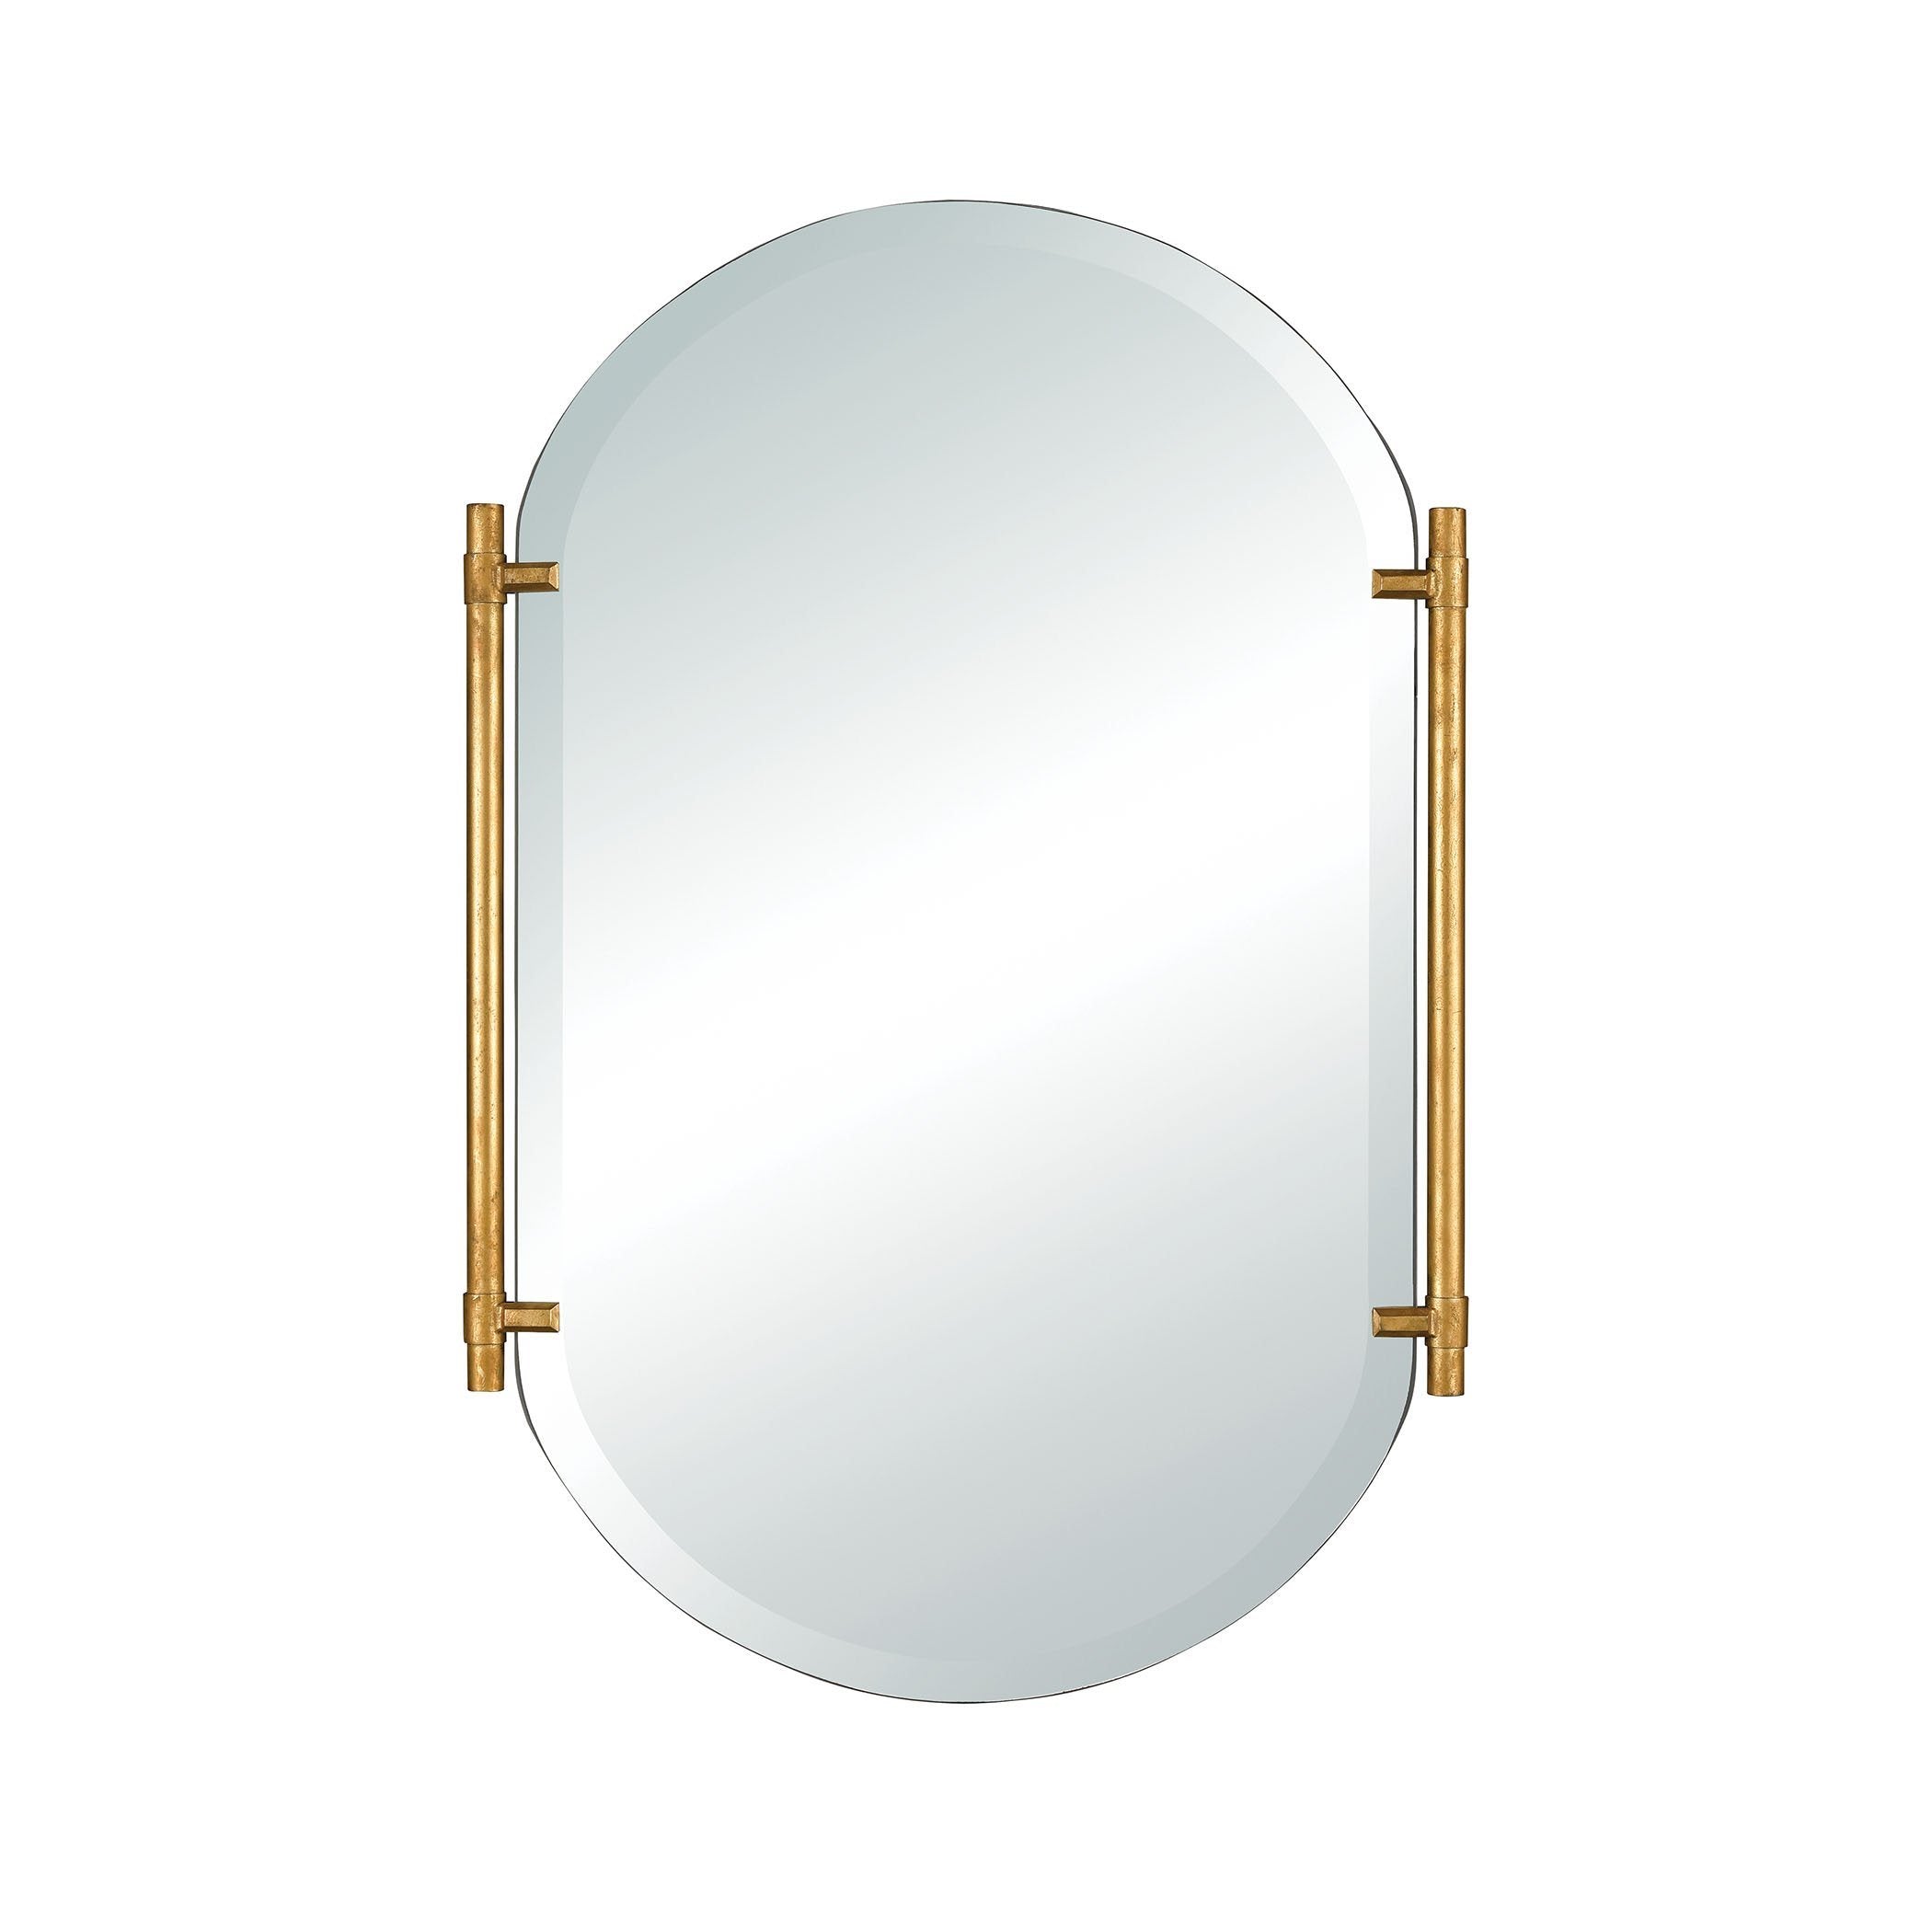 Actor's Chapel Wall Mirror Mirrors Sterling 